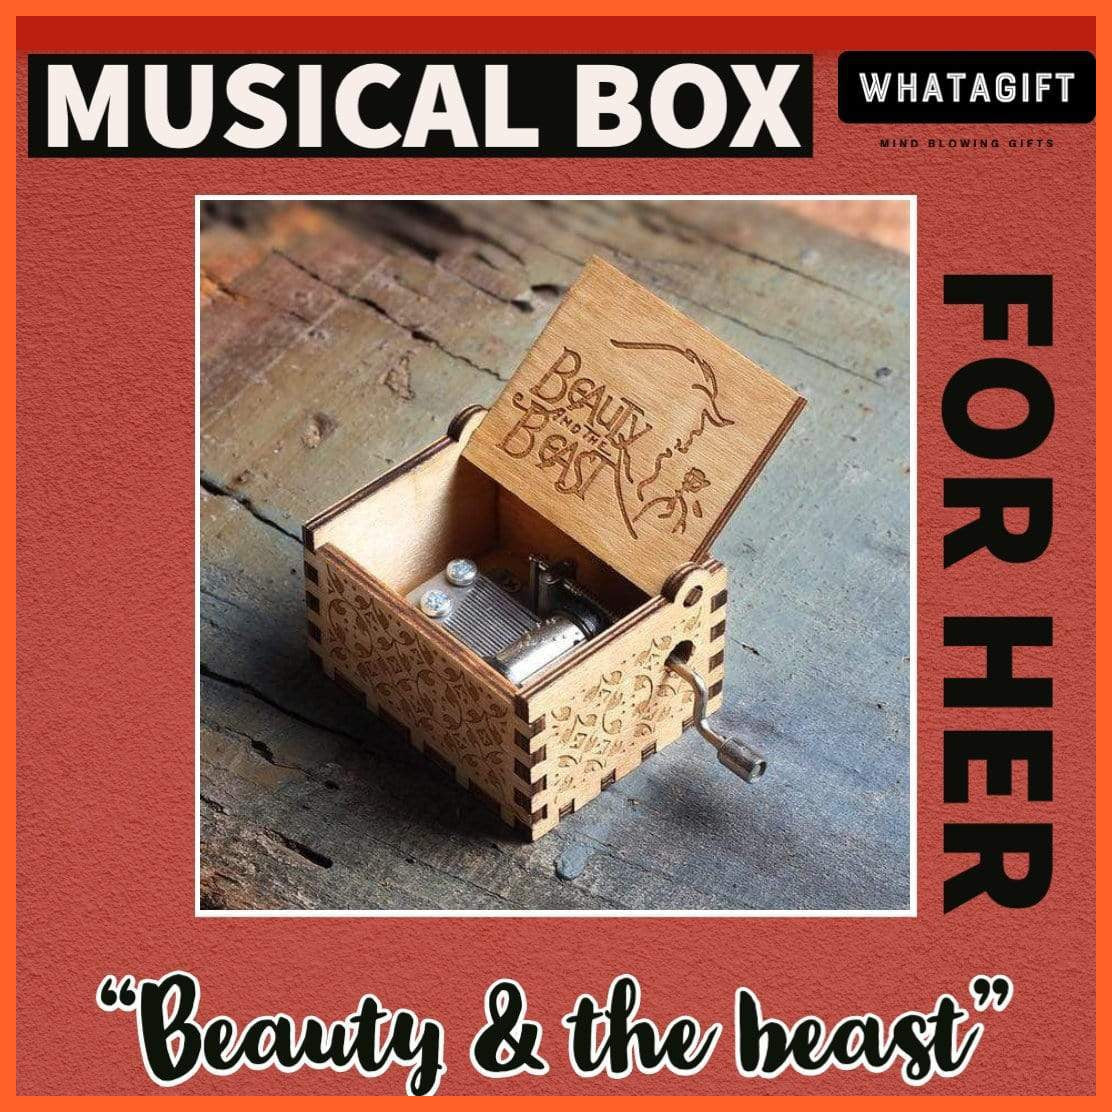 Wooden Classical Music Box Beauty And The Beast | whatagift.com.au.